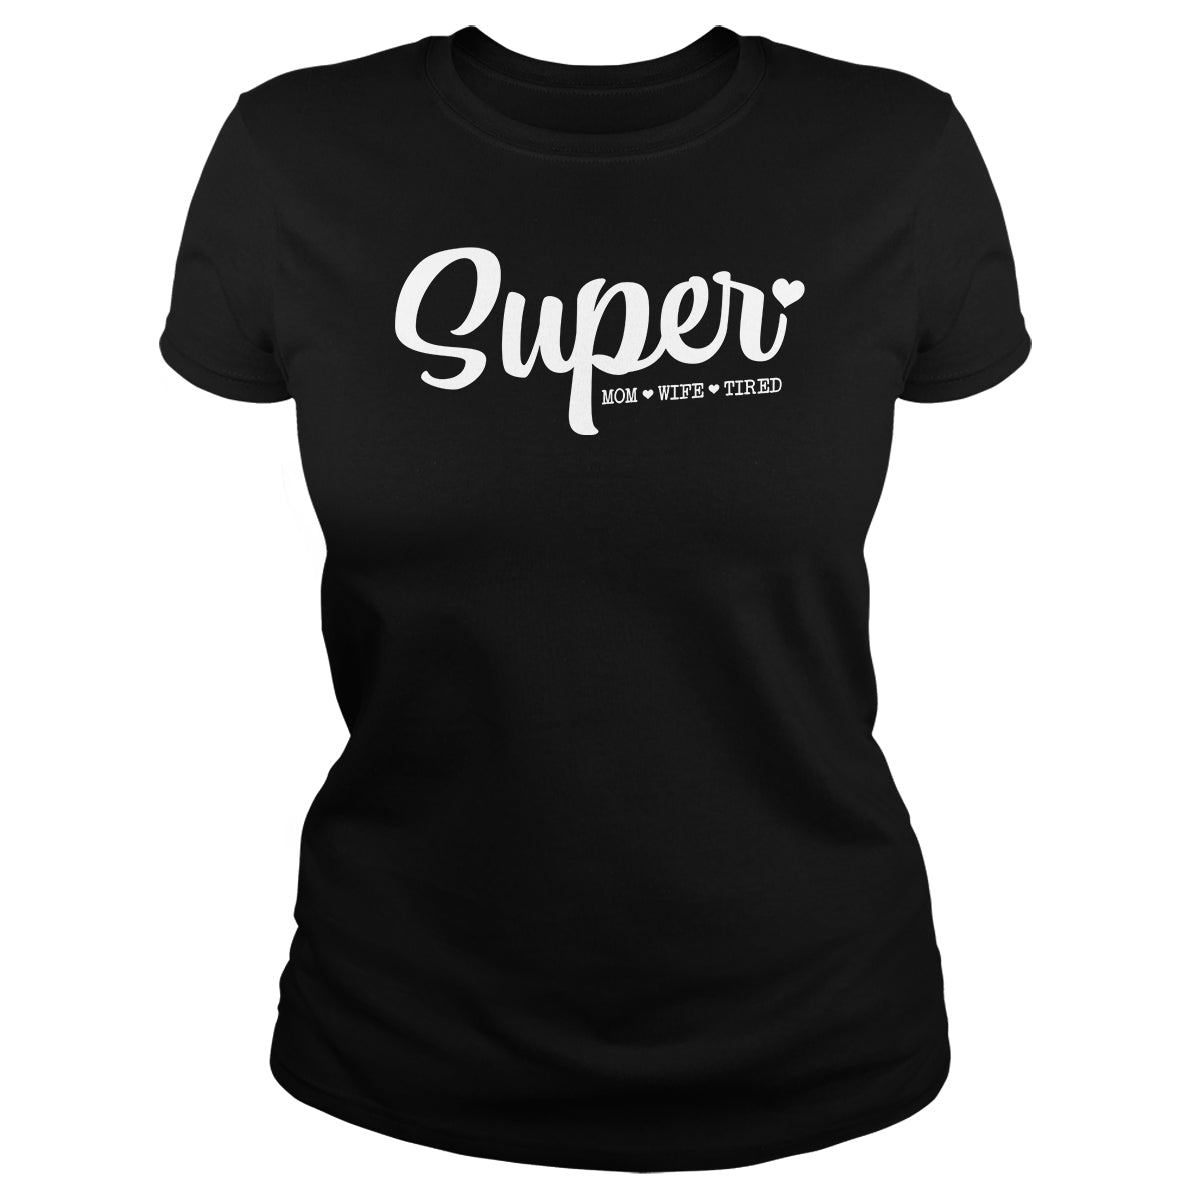 Super -Mom, Wife, Tired - BustedTees.com